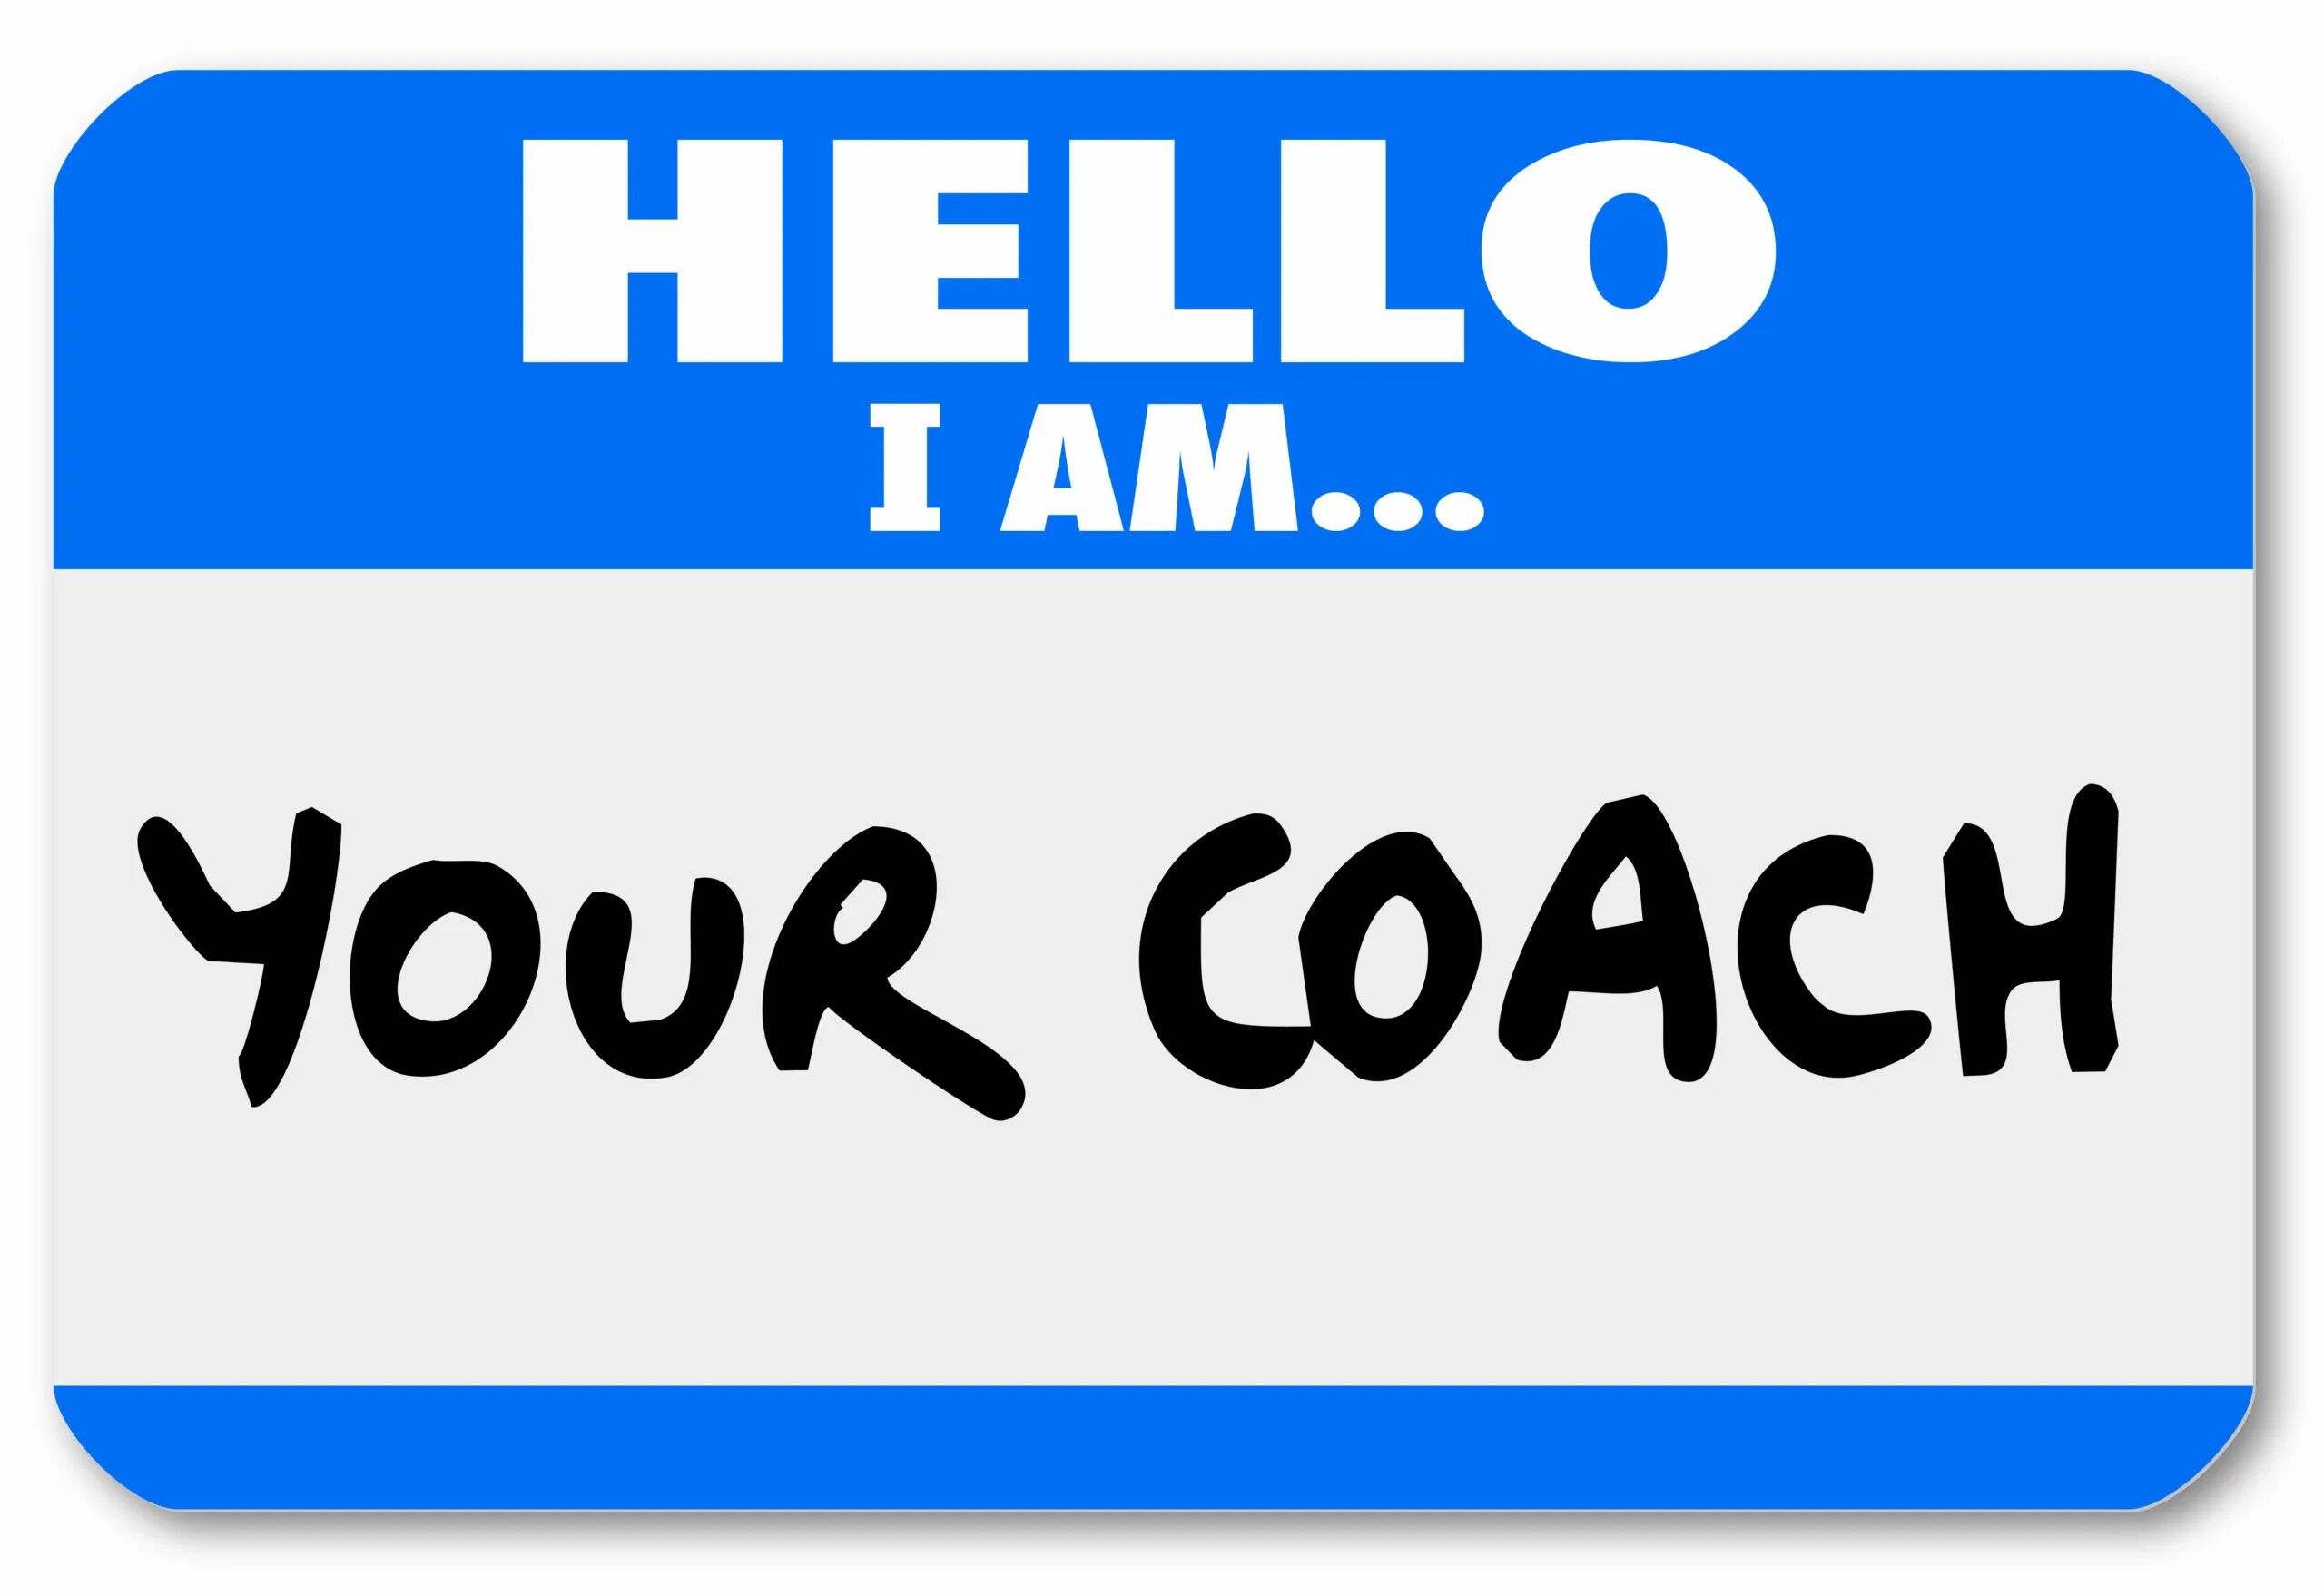 Hello i like. Картинка hello i am. Safe coach. Hello i am your support. Your coach (in a book).